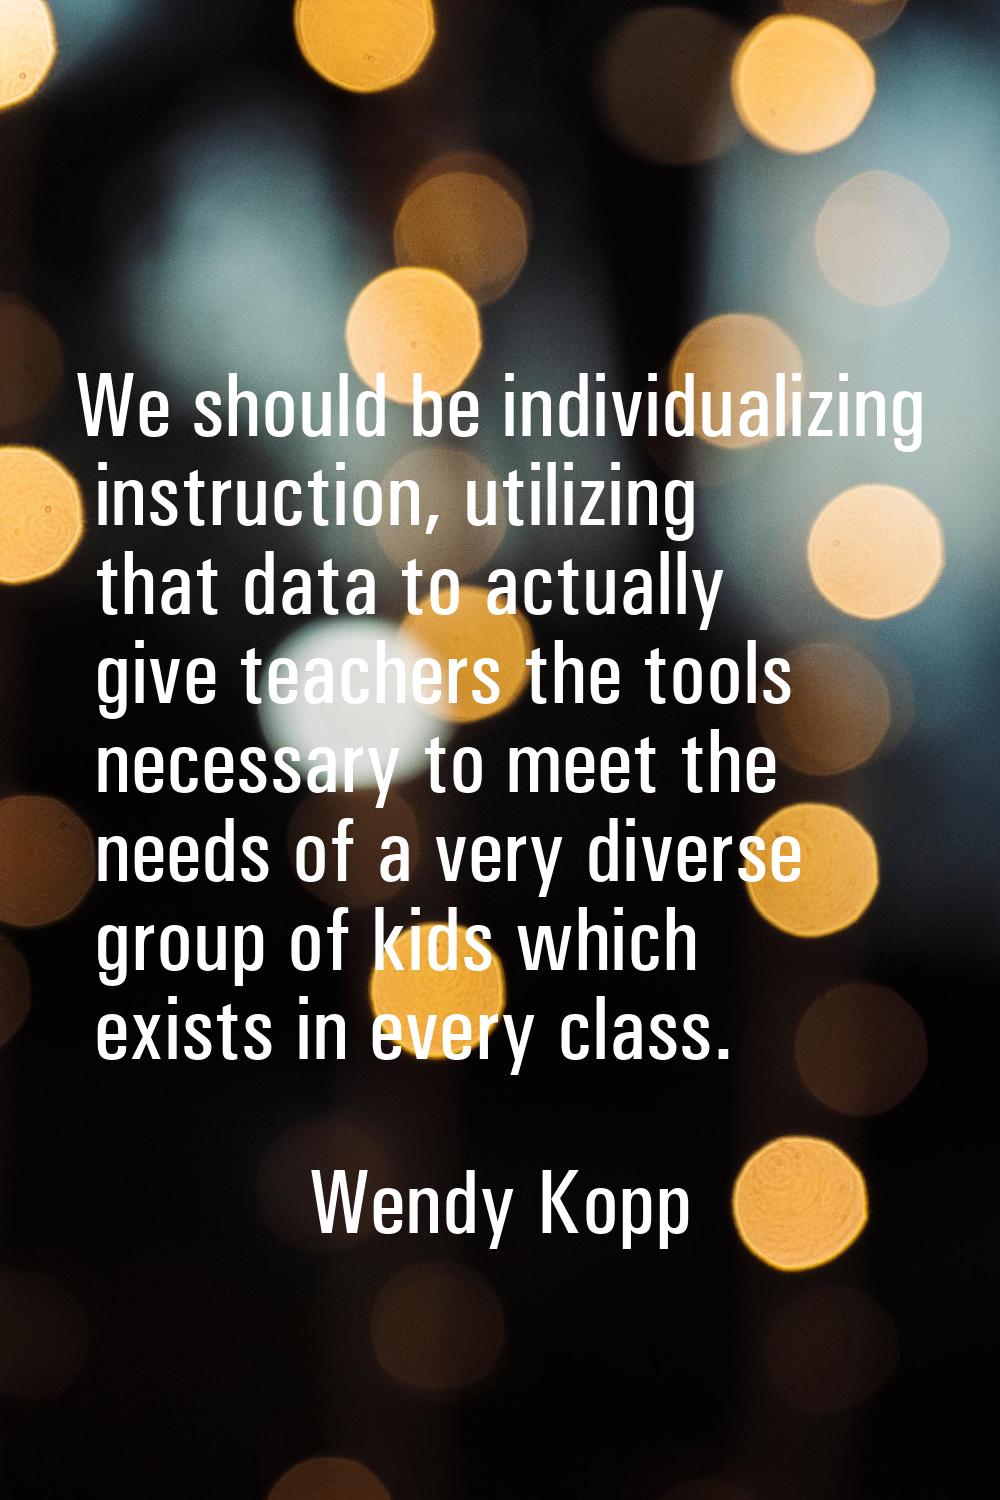 We should be individualizing instruction, utilizing that data to actually give teachers the tools n